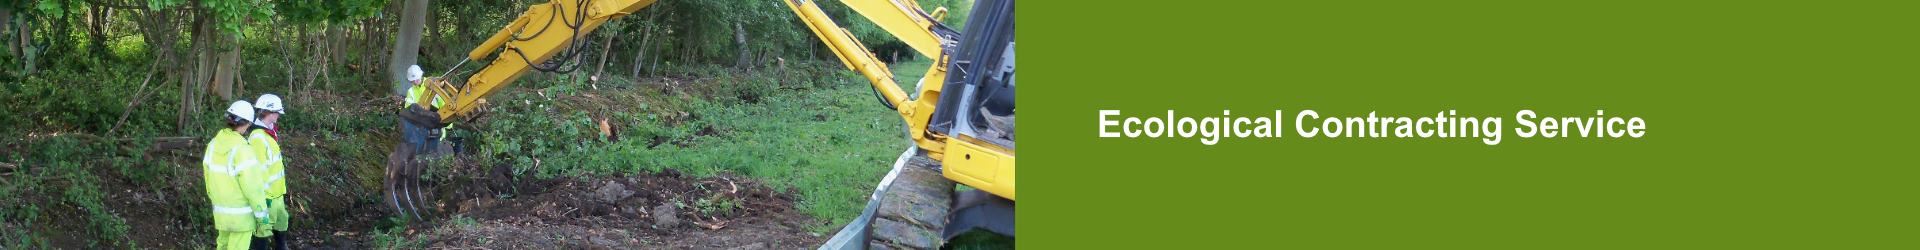 Tree Consultancy Midlands - Ecological Contracting and Vegetation Clearance Service Midlands